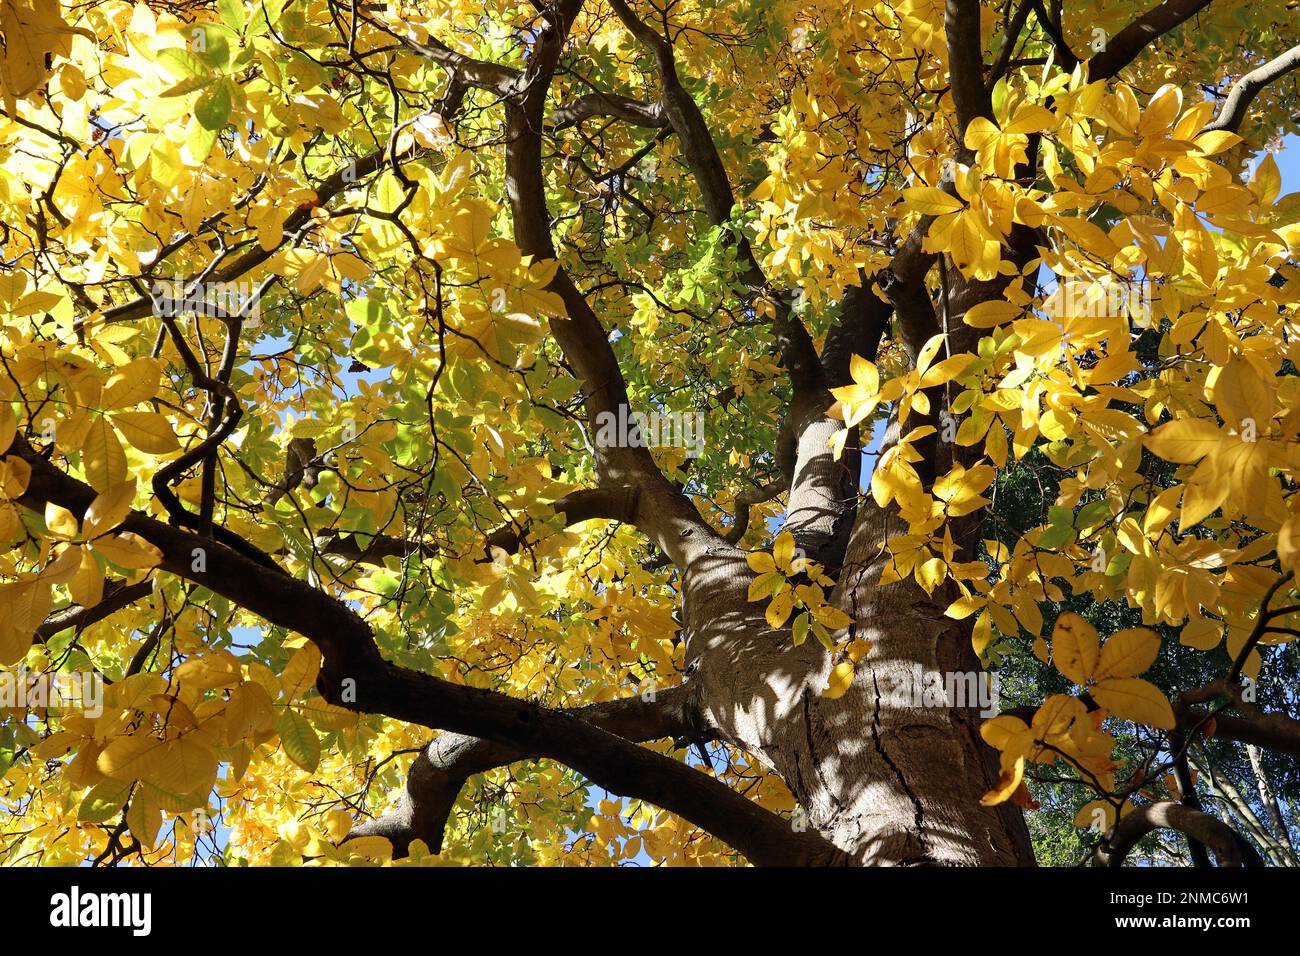 Shagbark HIckory (Carya Ovata var. Pubescens), looking up to the golden canopy of leaves on a bright autumn/fall day in October. Kew Gardens, England Stock Photo